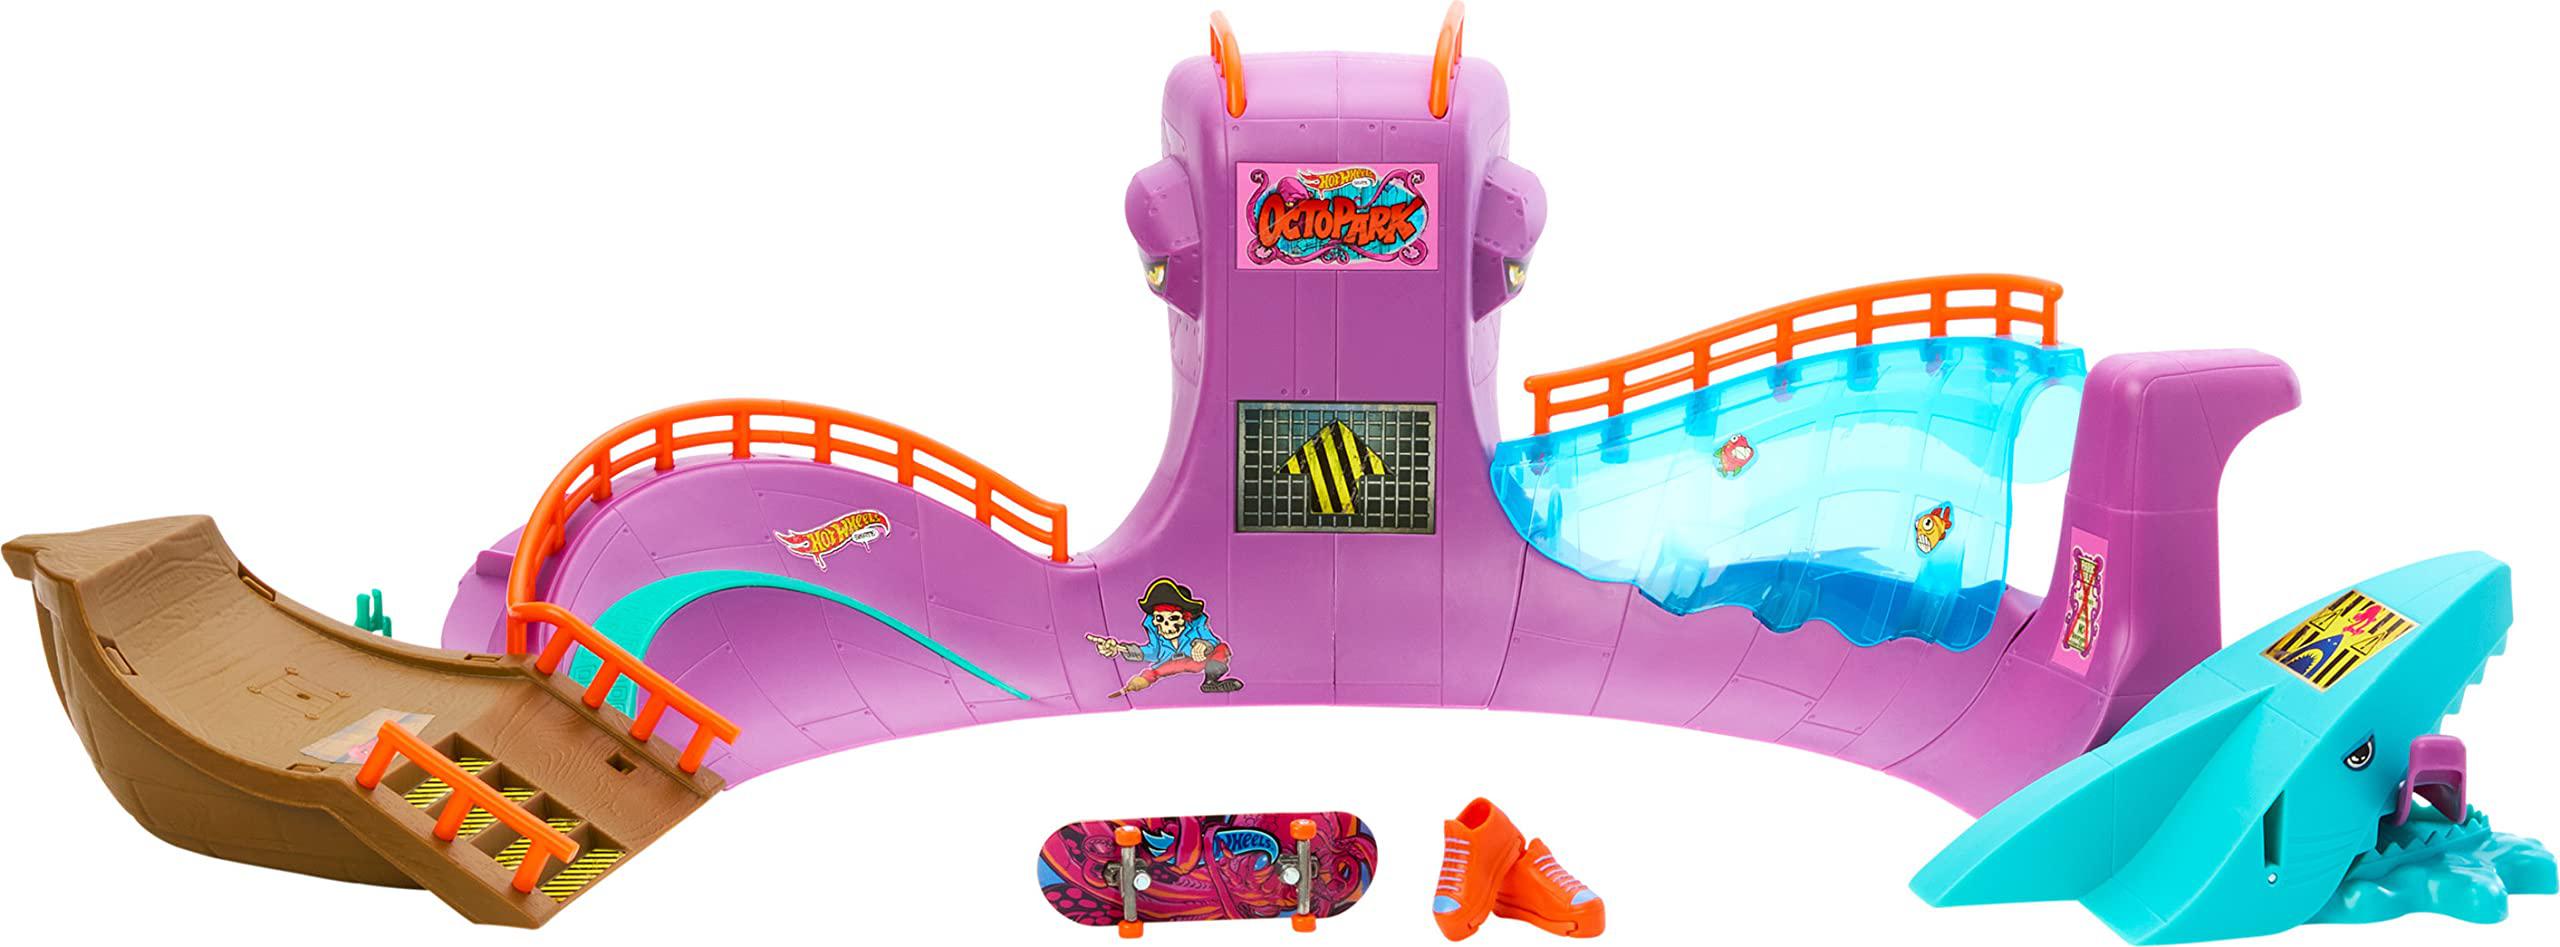 hot wheels skate octopus skatepark playset with tony hawk fingerboard & pair of removable skate shoes, includes storage